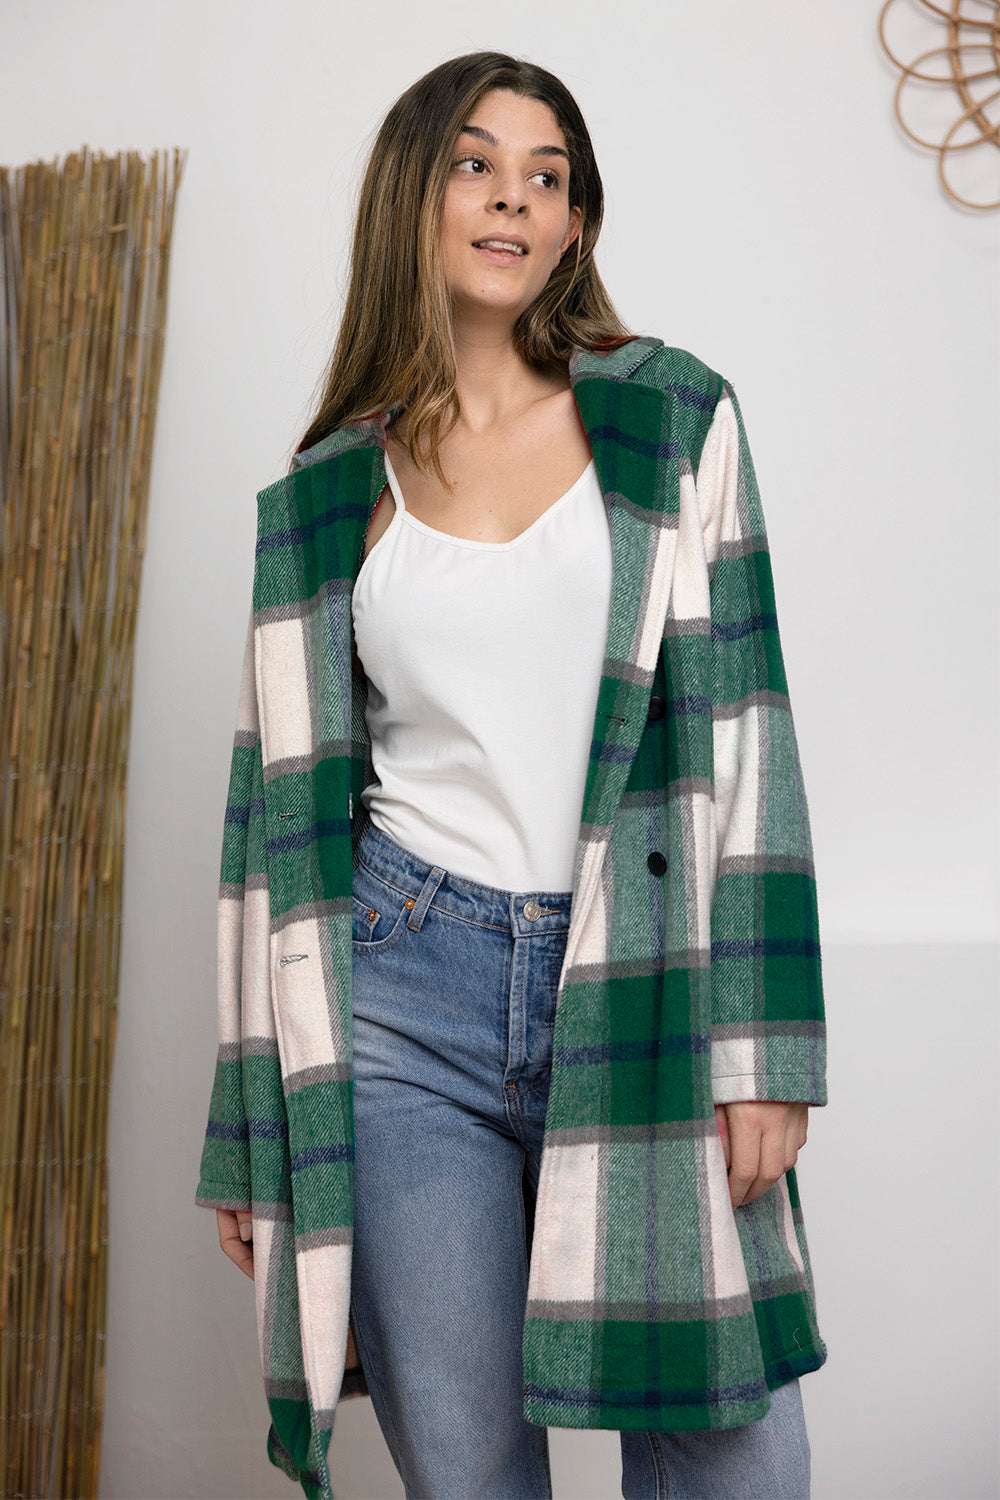 Double Take Full Size Plaid Button Up Lapel Collar Coat - Three Bears Boutique